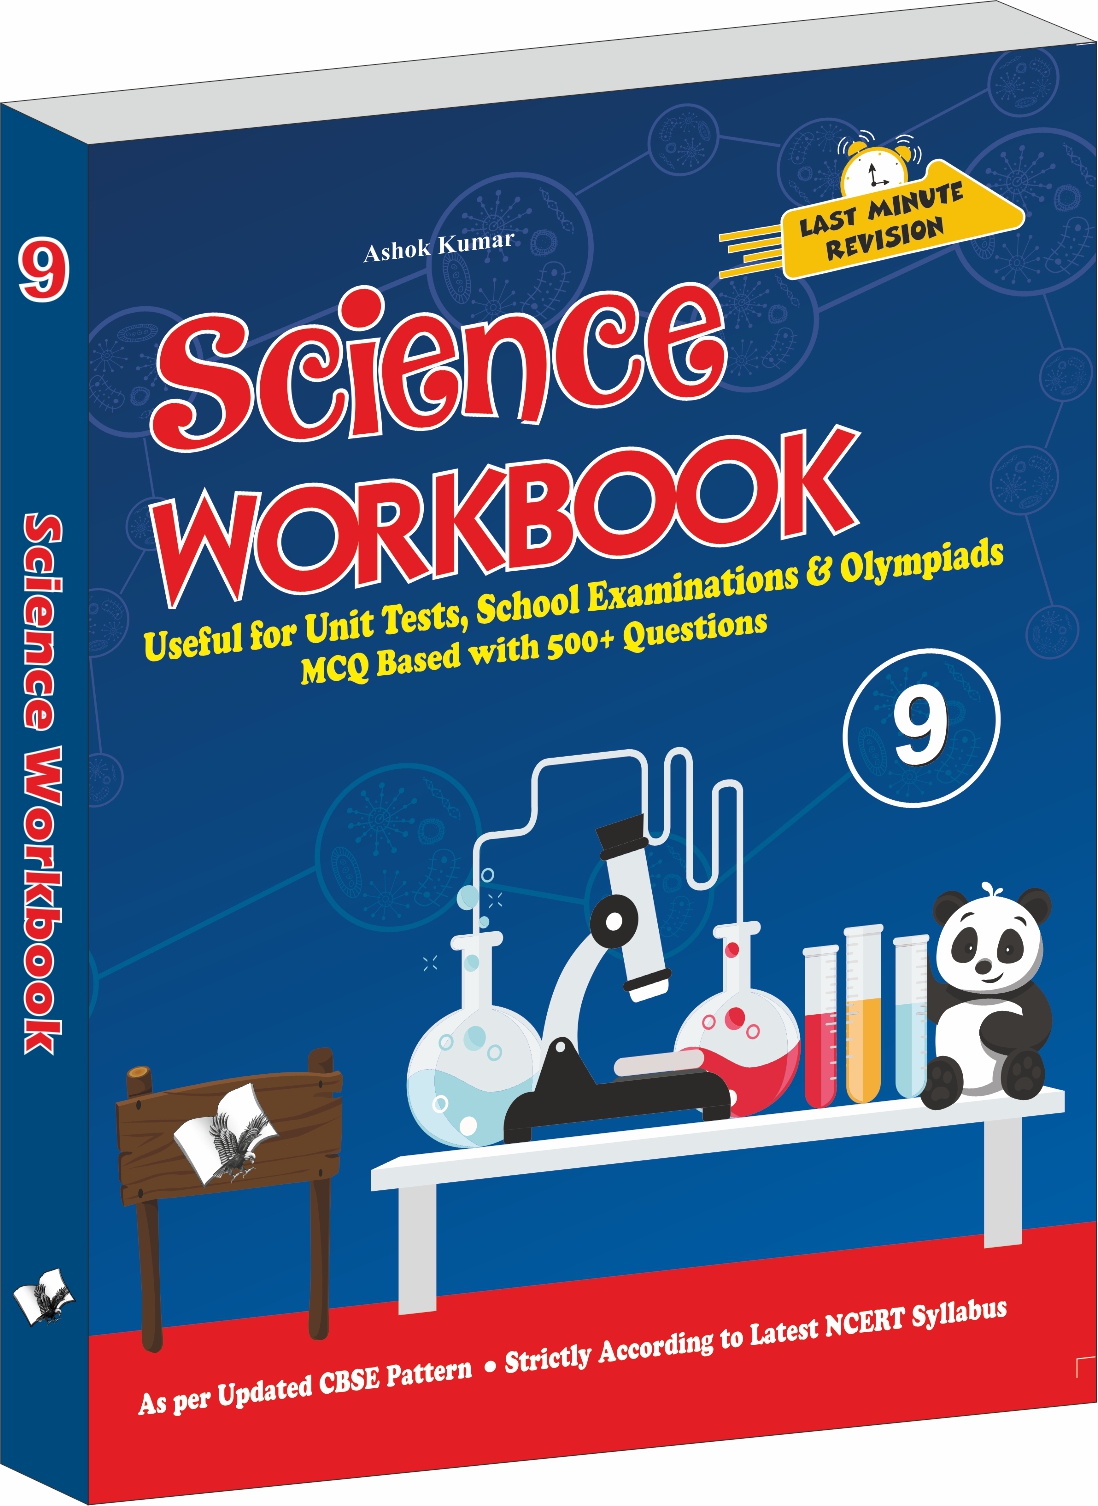 science-workbook-class-9-useful-for-unit-tests-school-examinations-olympiads